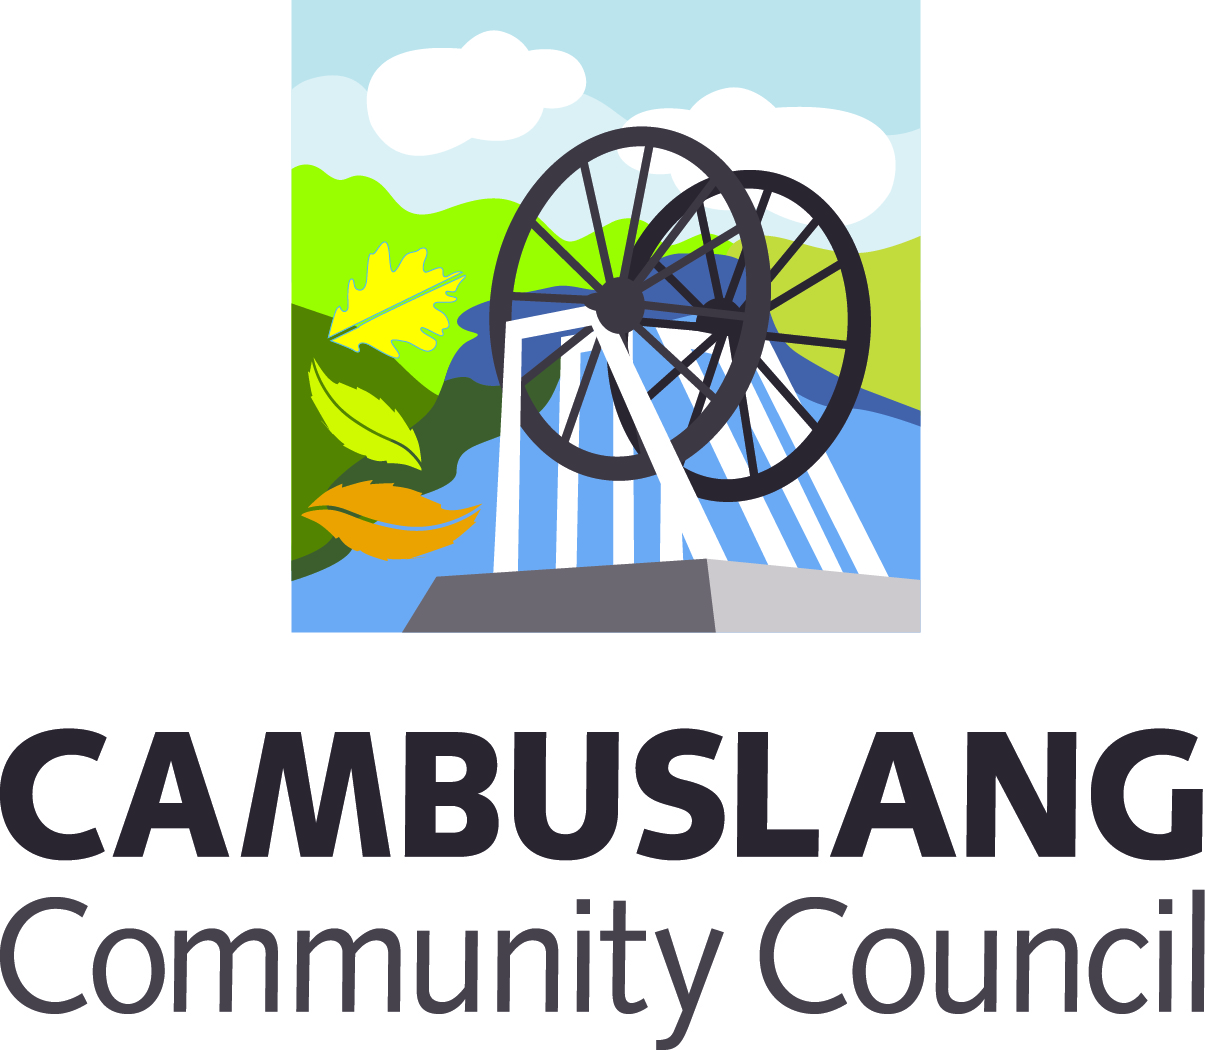 Greening Cambuslang Fund is now open for applications